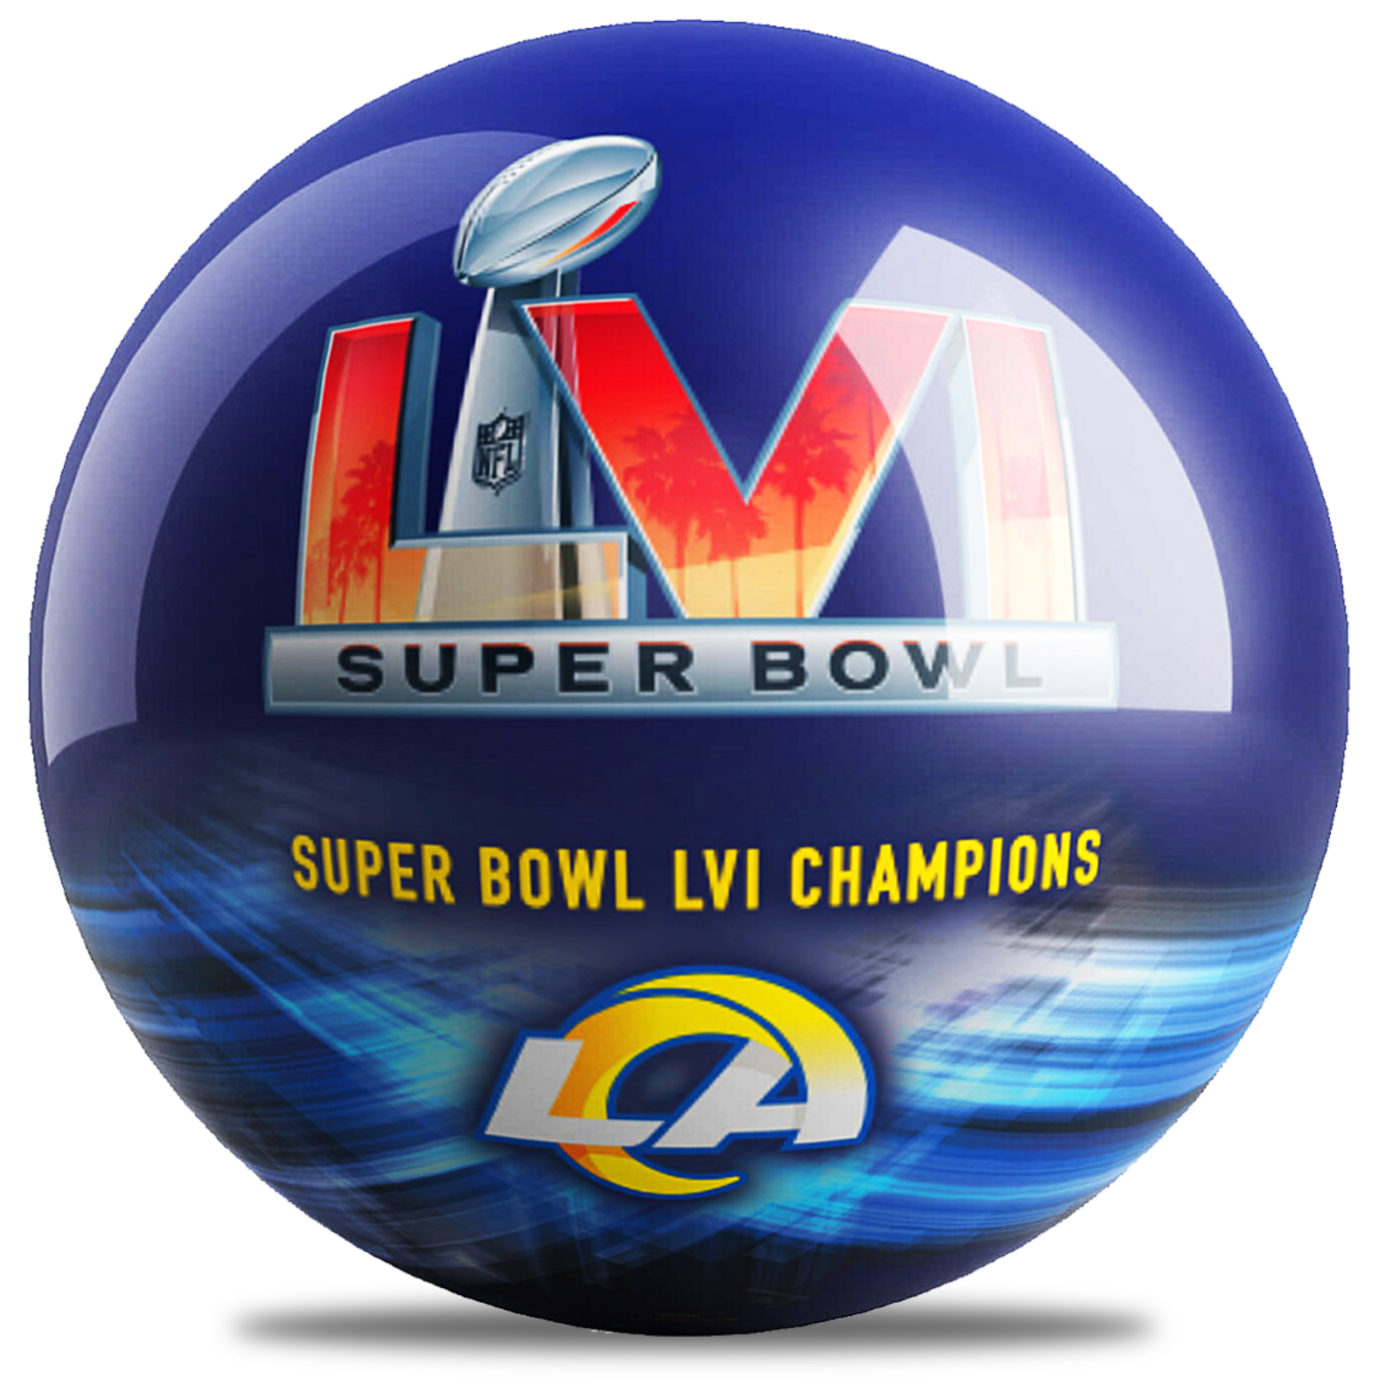 Can  a bowling ball be customized to 2 football teams like the Rams and the Chargers